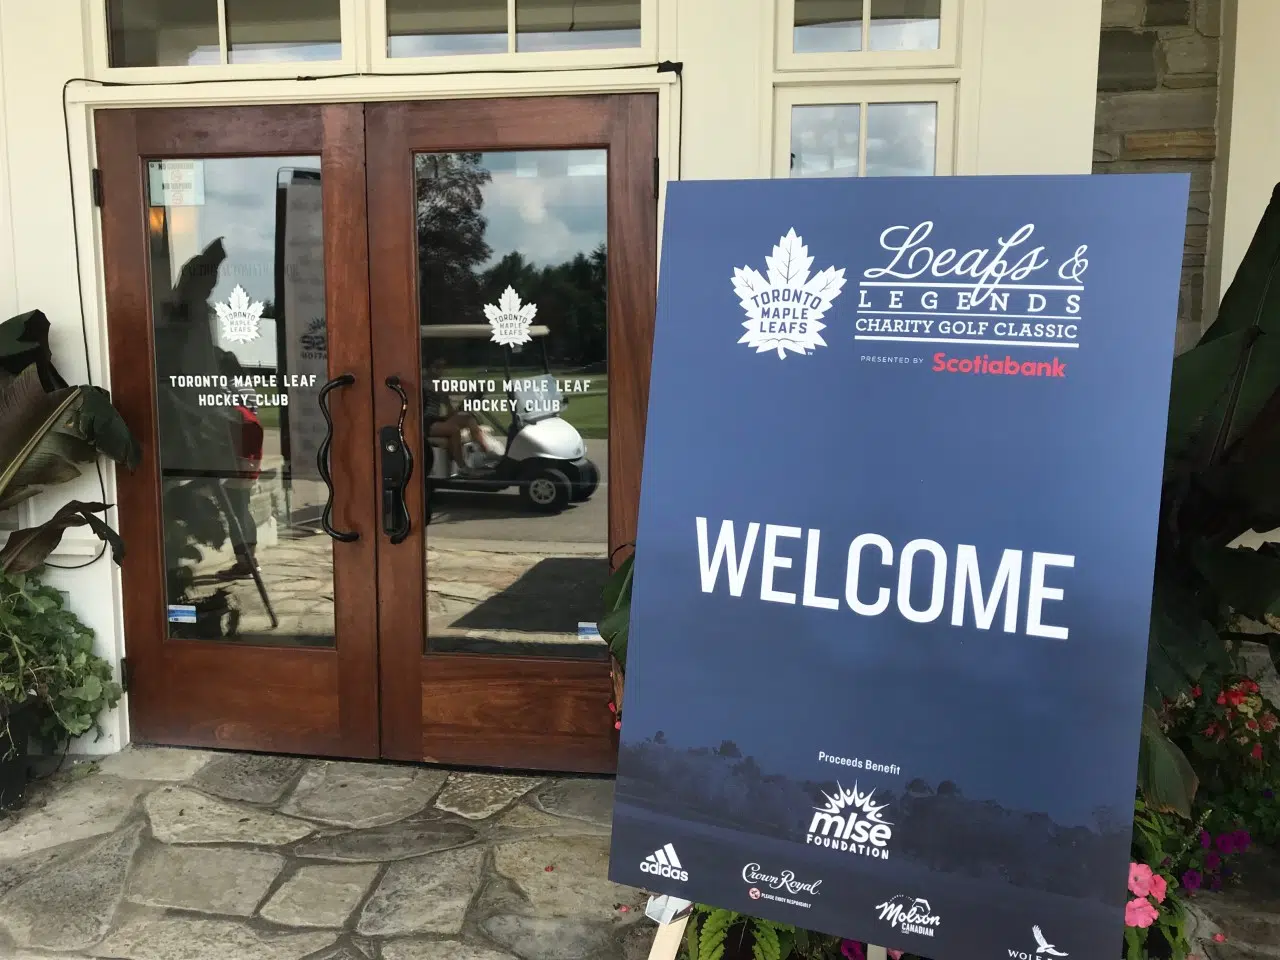 Five former Leafs to play Moncton golf course